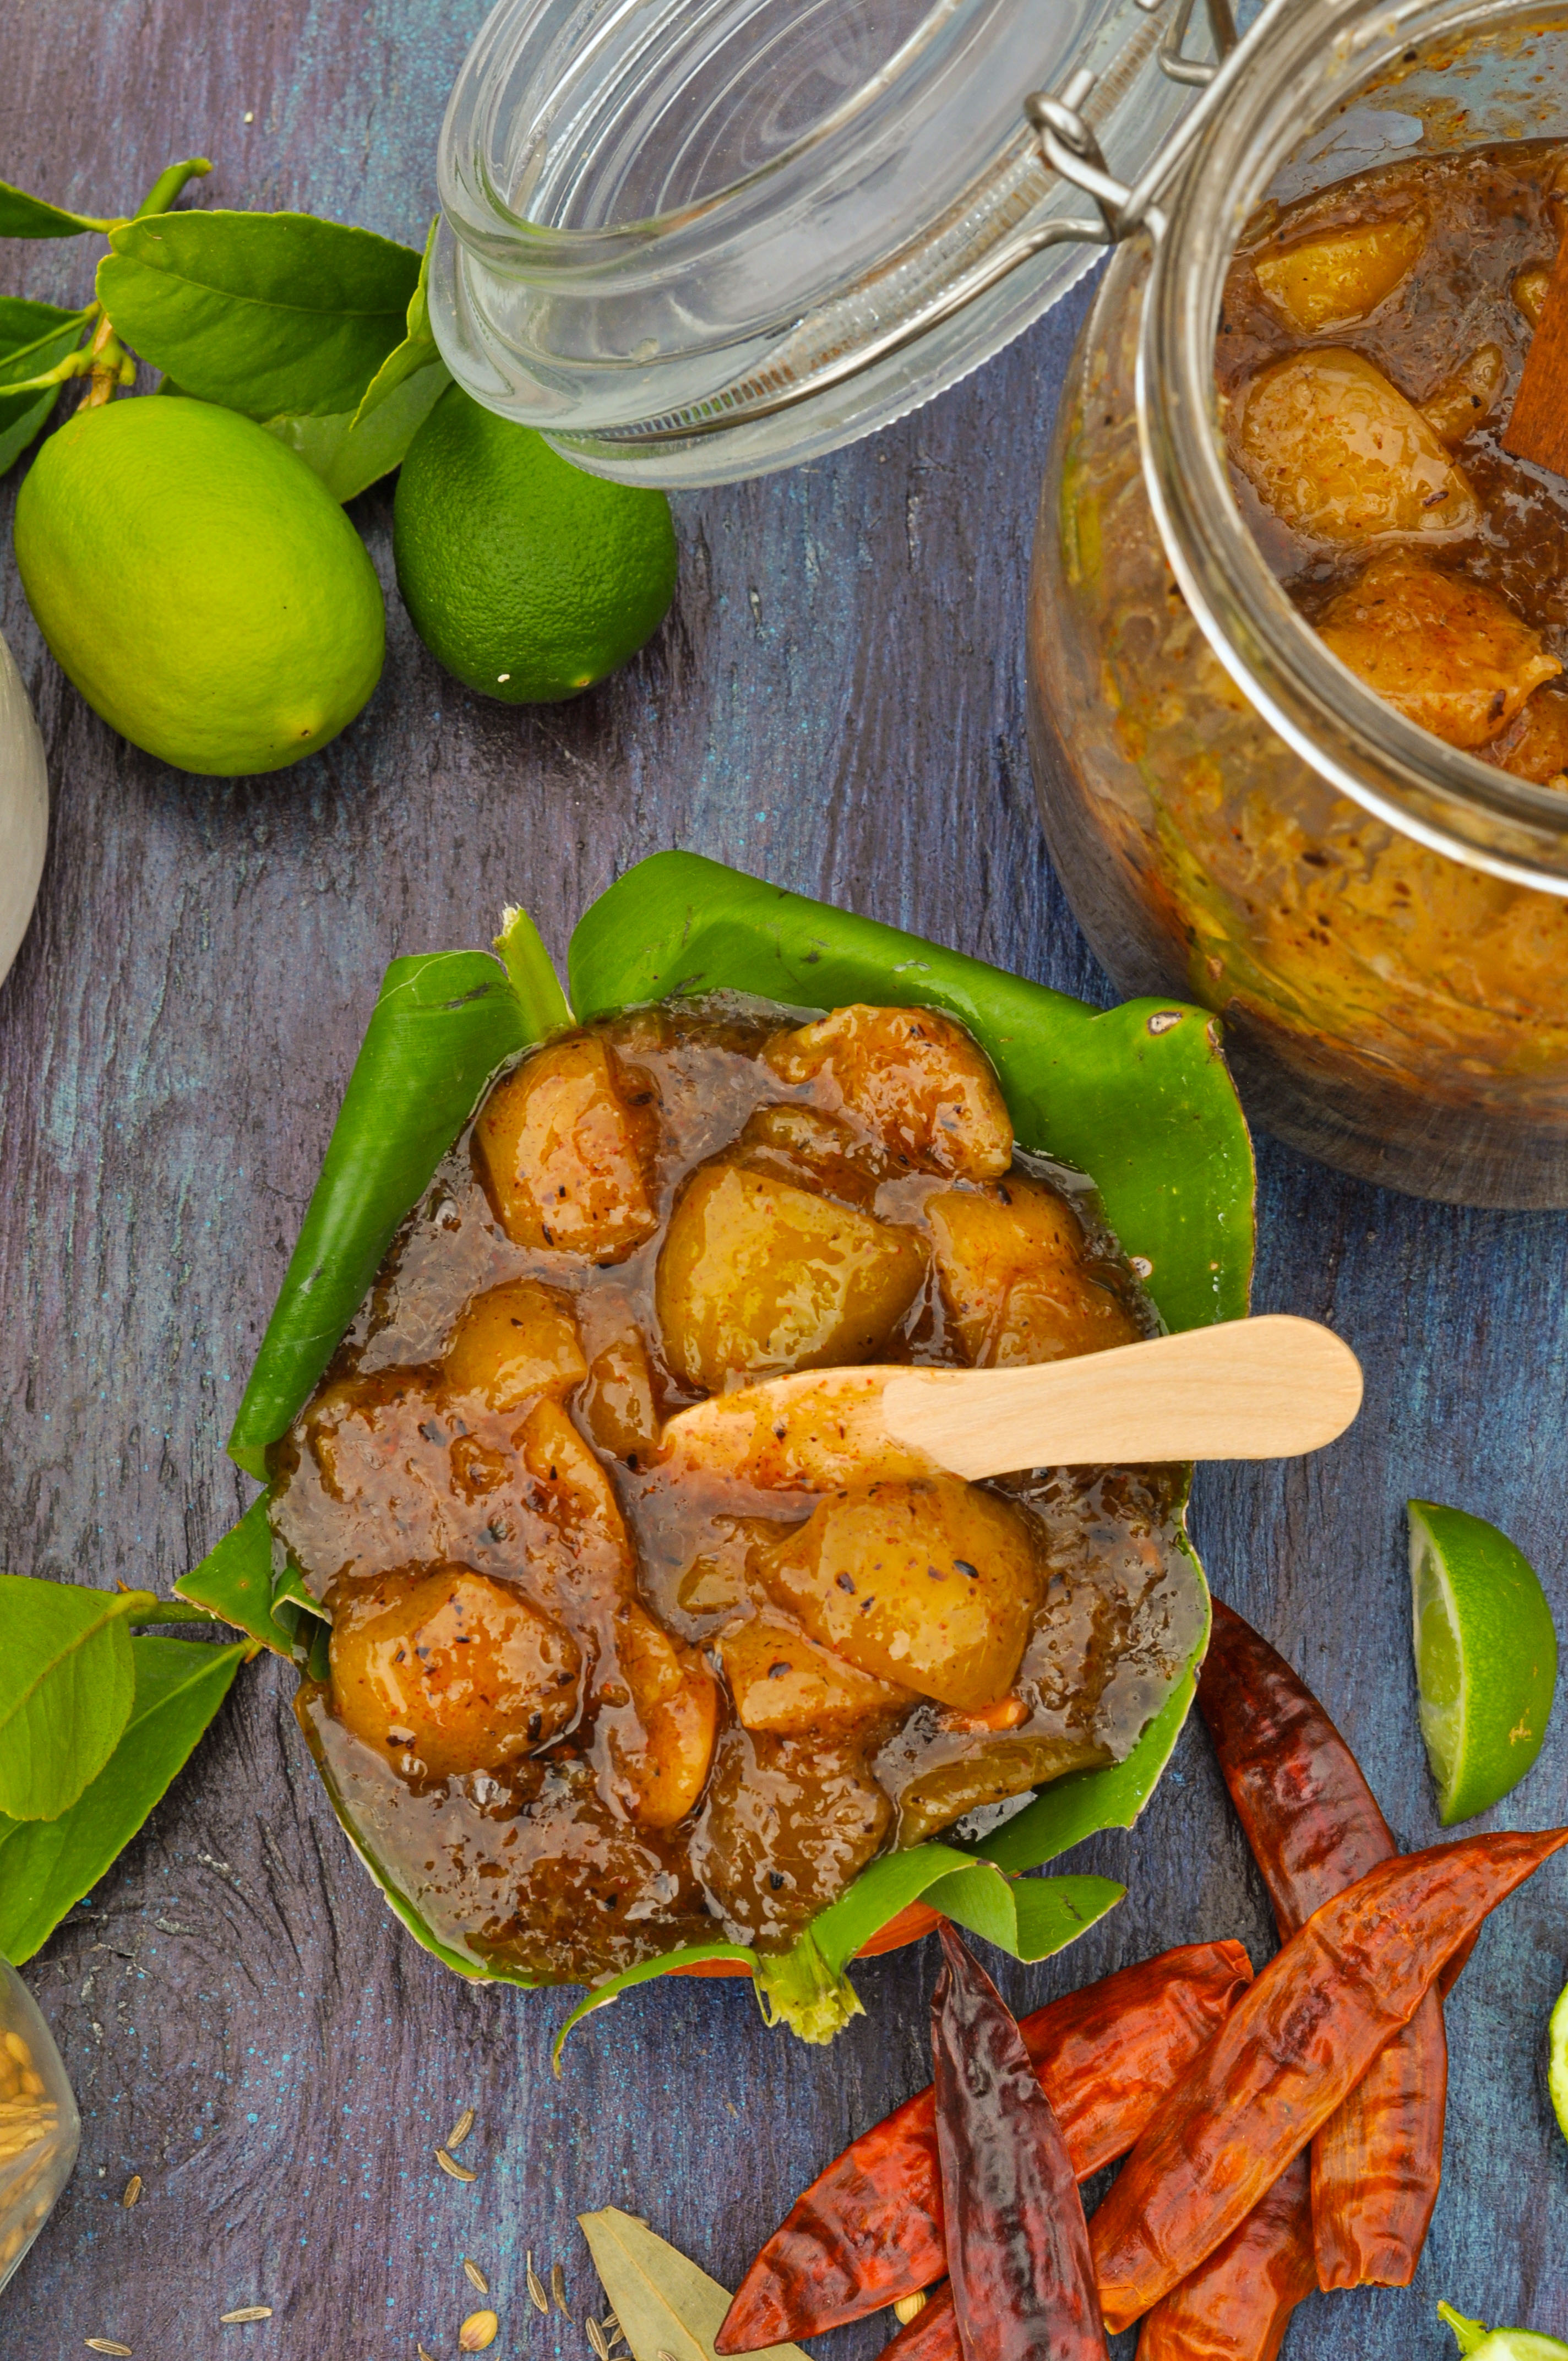 Sweet and Sour Lime Pickle